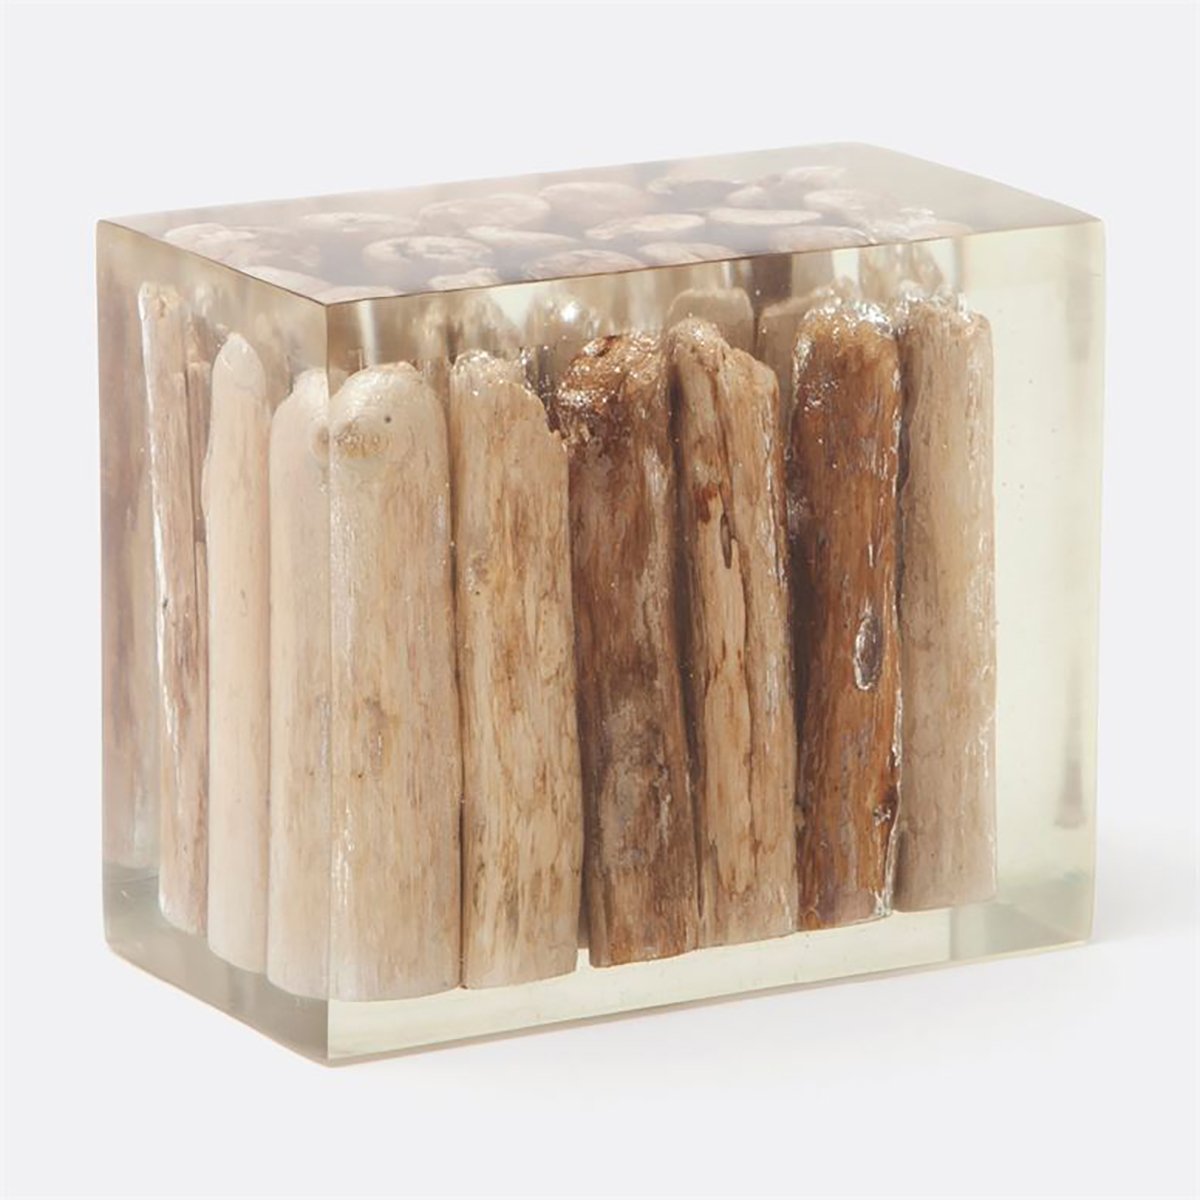 Made Goods Heath Driftwood in Resin Object, Set of 2